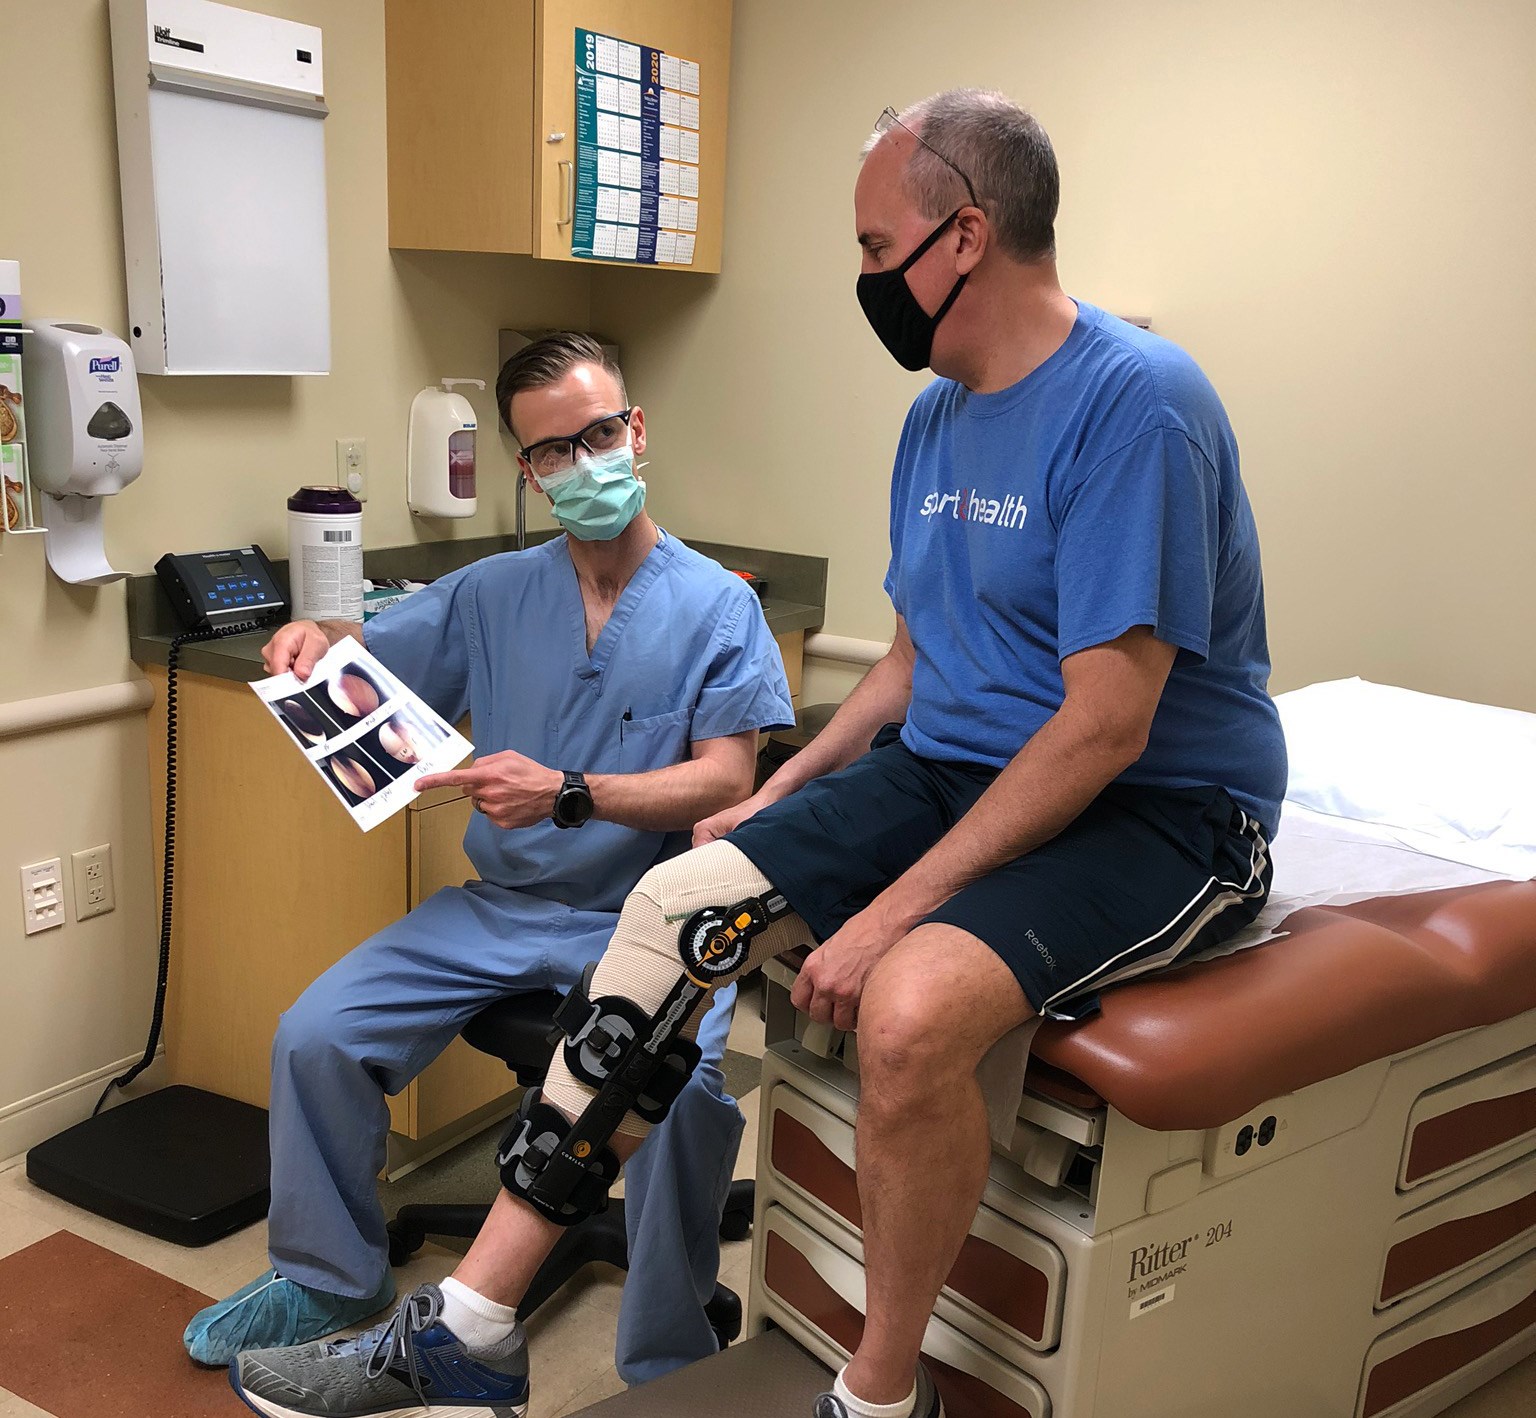 Michael Day, MD, an orthopedic surgeon with WellSpan Orthopedics in Chambersburg, reviews an image with Stephen Wilkinson of Shippensburg. Wilkinson had surgery in May to repair his right knee meniscus. 